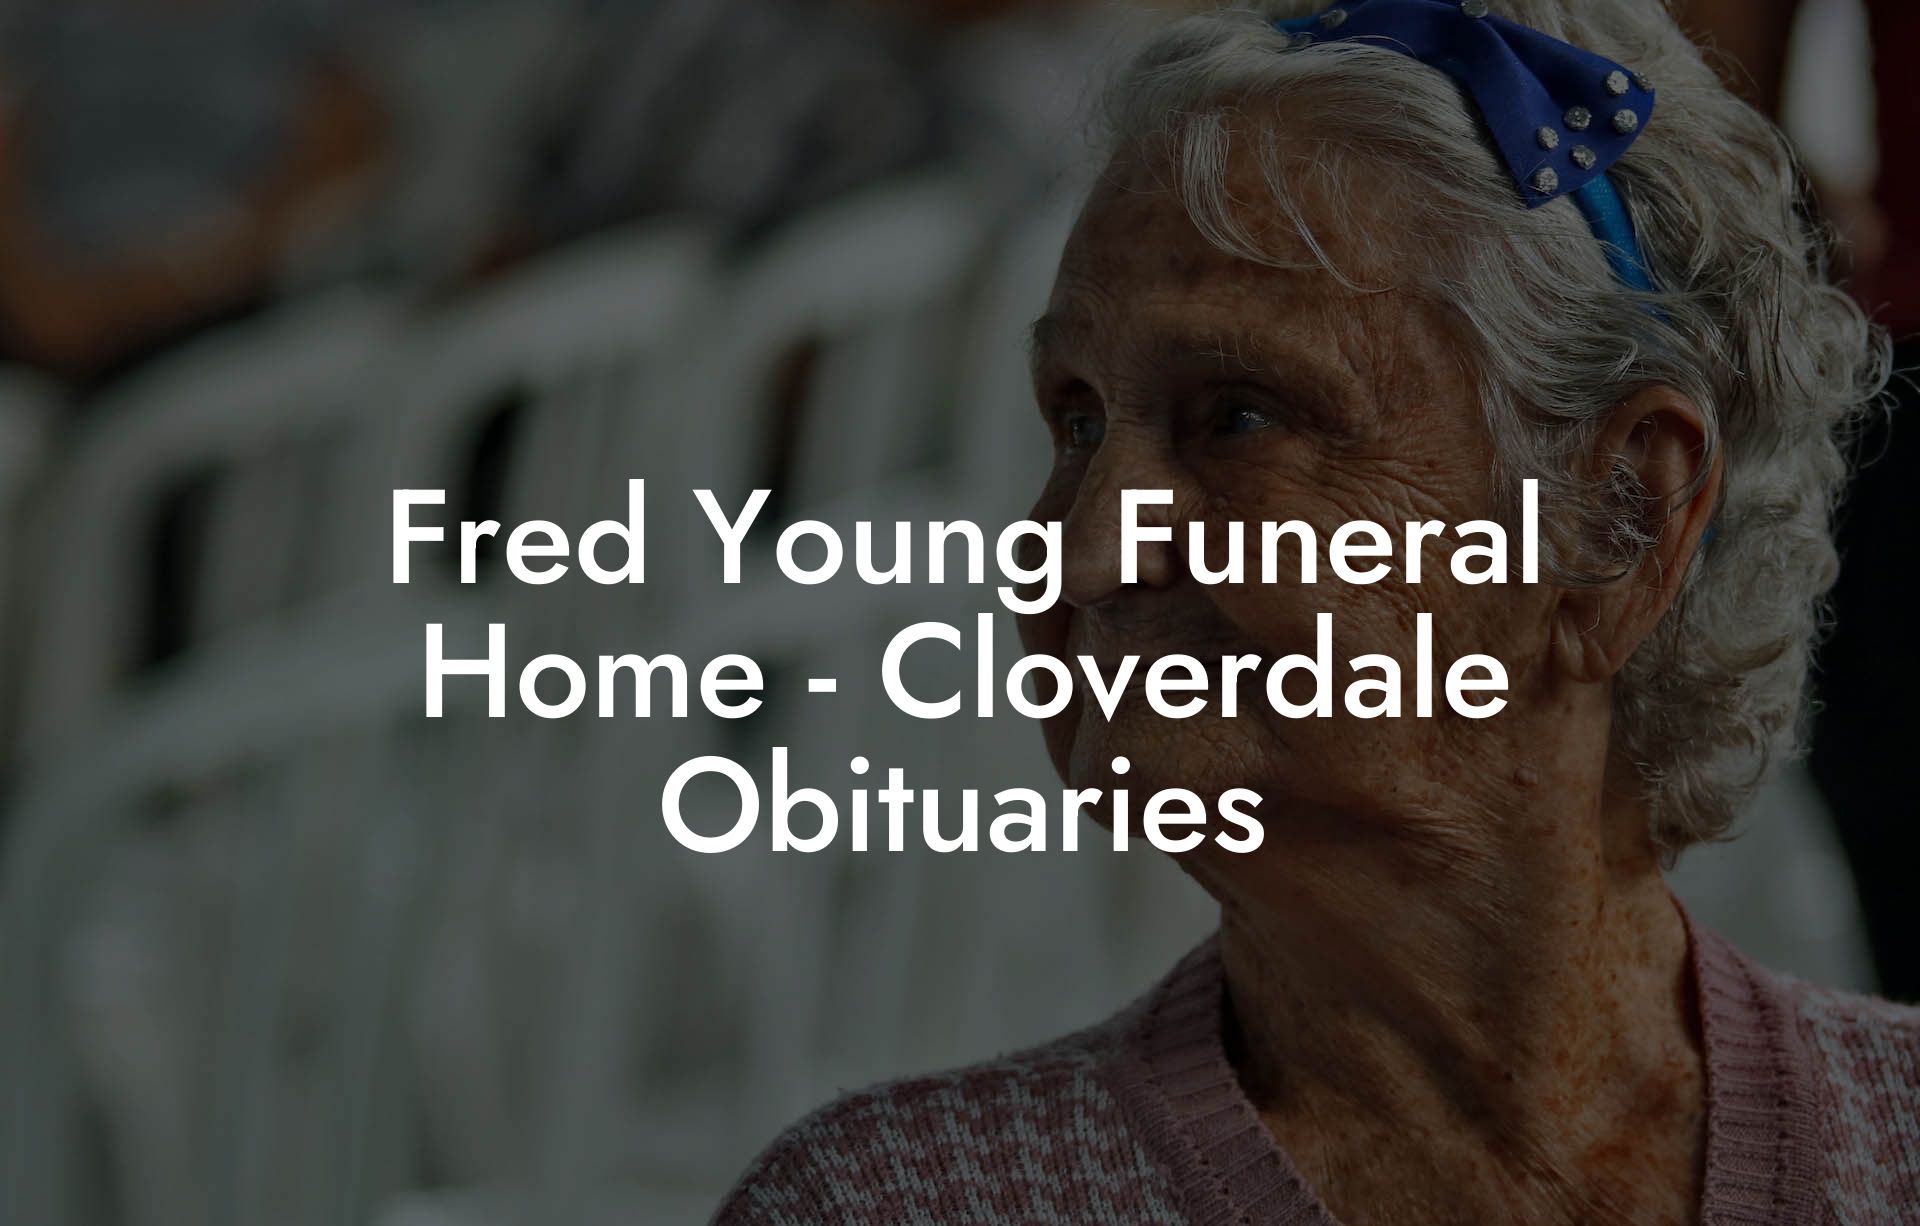 Fred Young Funeral Home - Cloverdale Obituaries